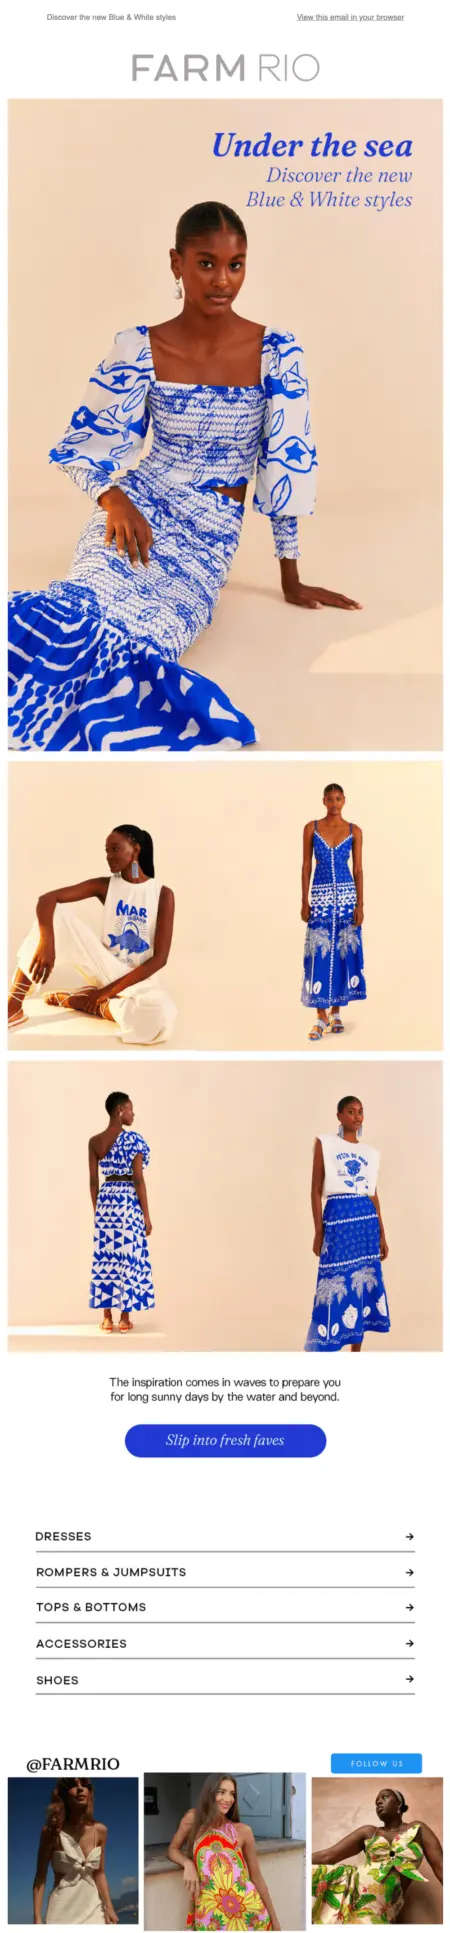 Image shows a product-focused email newsletter from fashion brand FARM Rio, highlighting new clothes in a blue and white color scheme. The headline reads “Under the sea,” and the CTA, located beneath several photos of models wearing the clothes, reads “Slip into fresh faves. ”